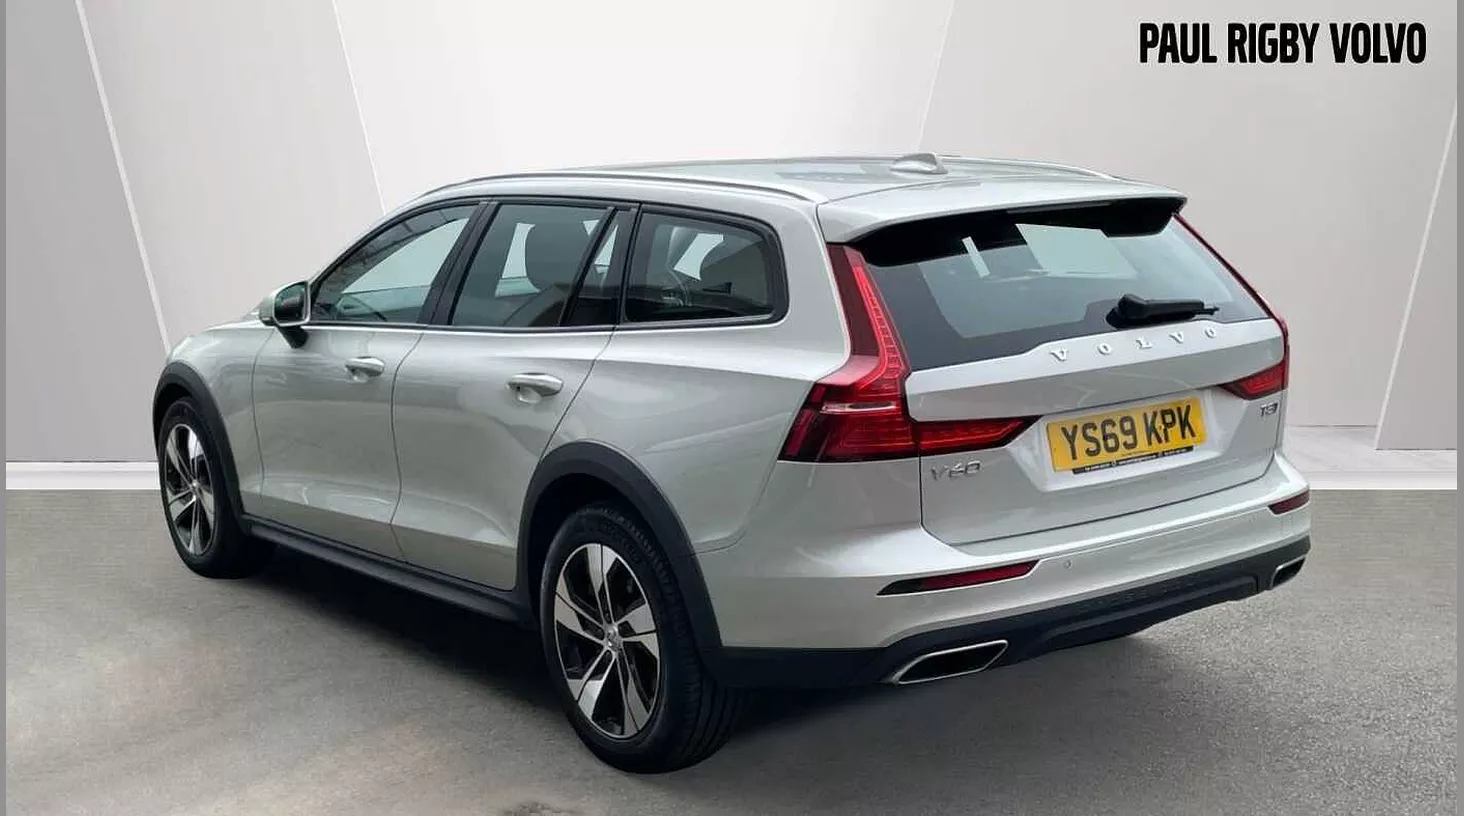 Volvo V60 Cross Country 2.0 T5 [250] Cross Country Plus 5dr AWD Auto